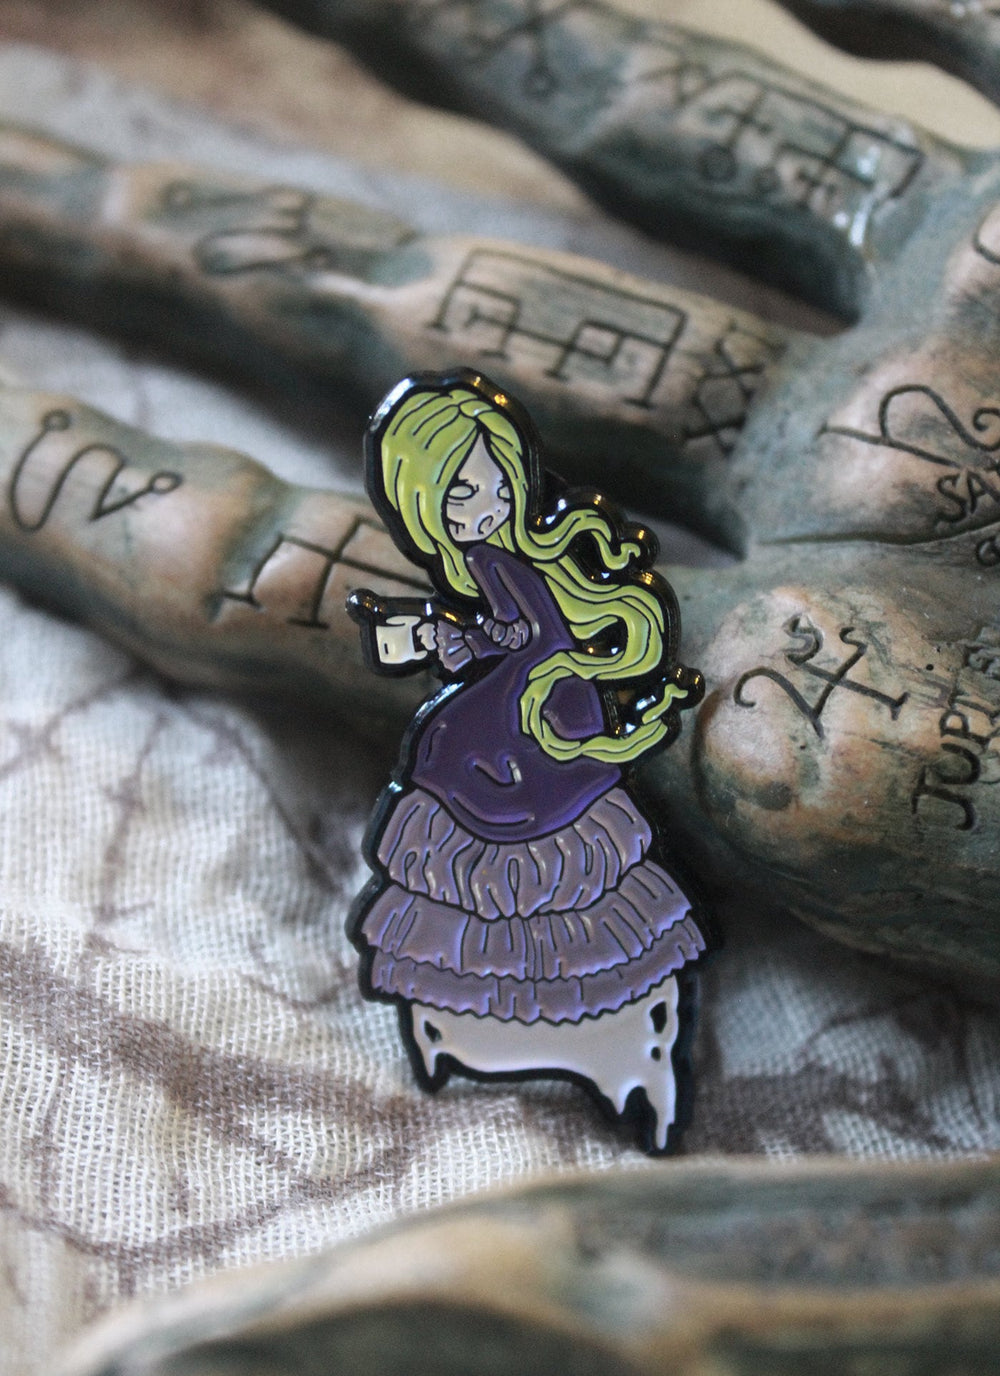 Mourning brew Banshee coffee ghost pin